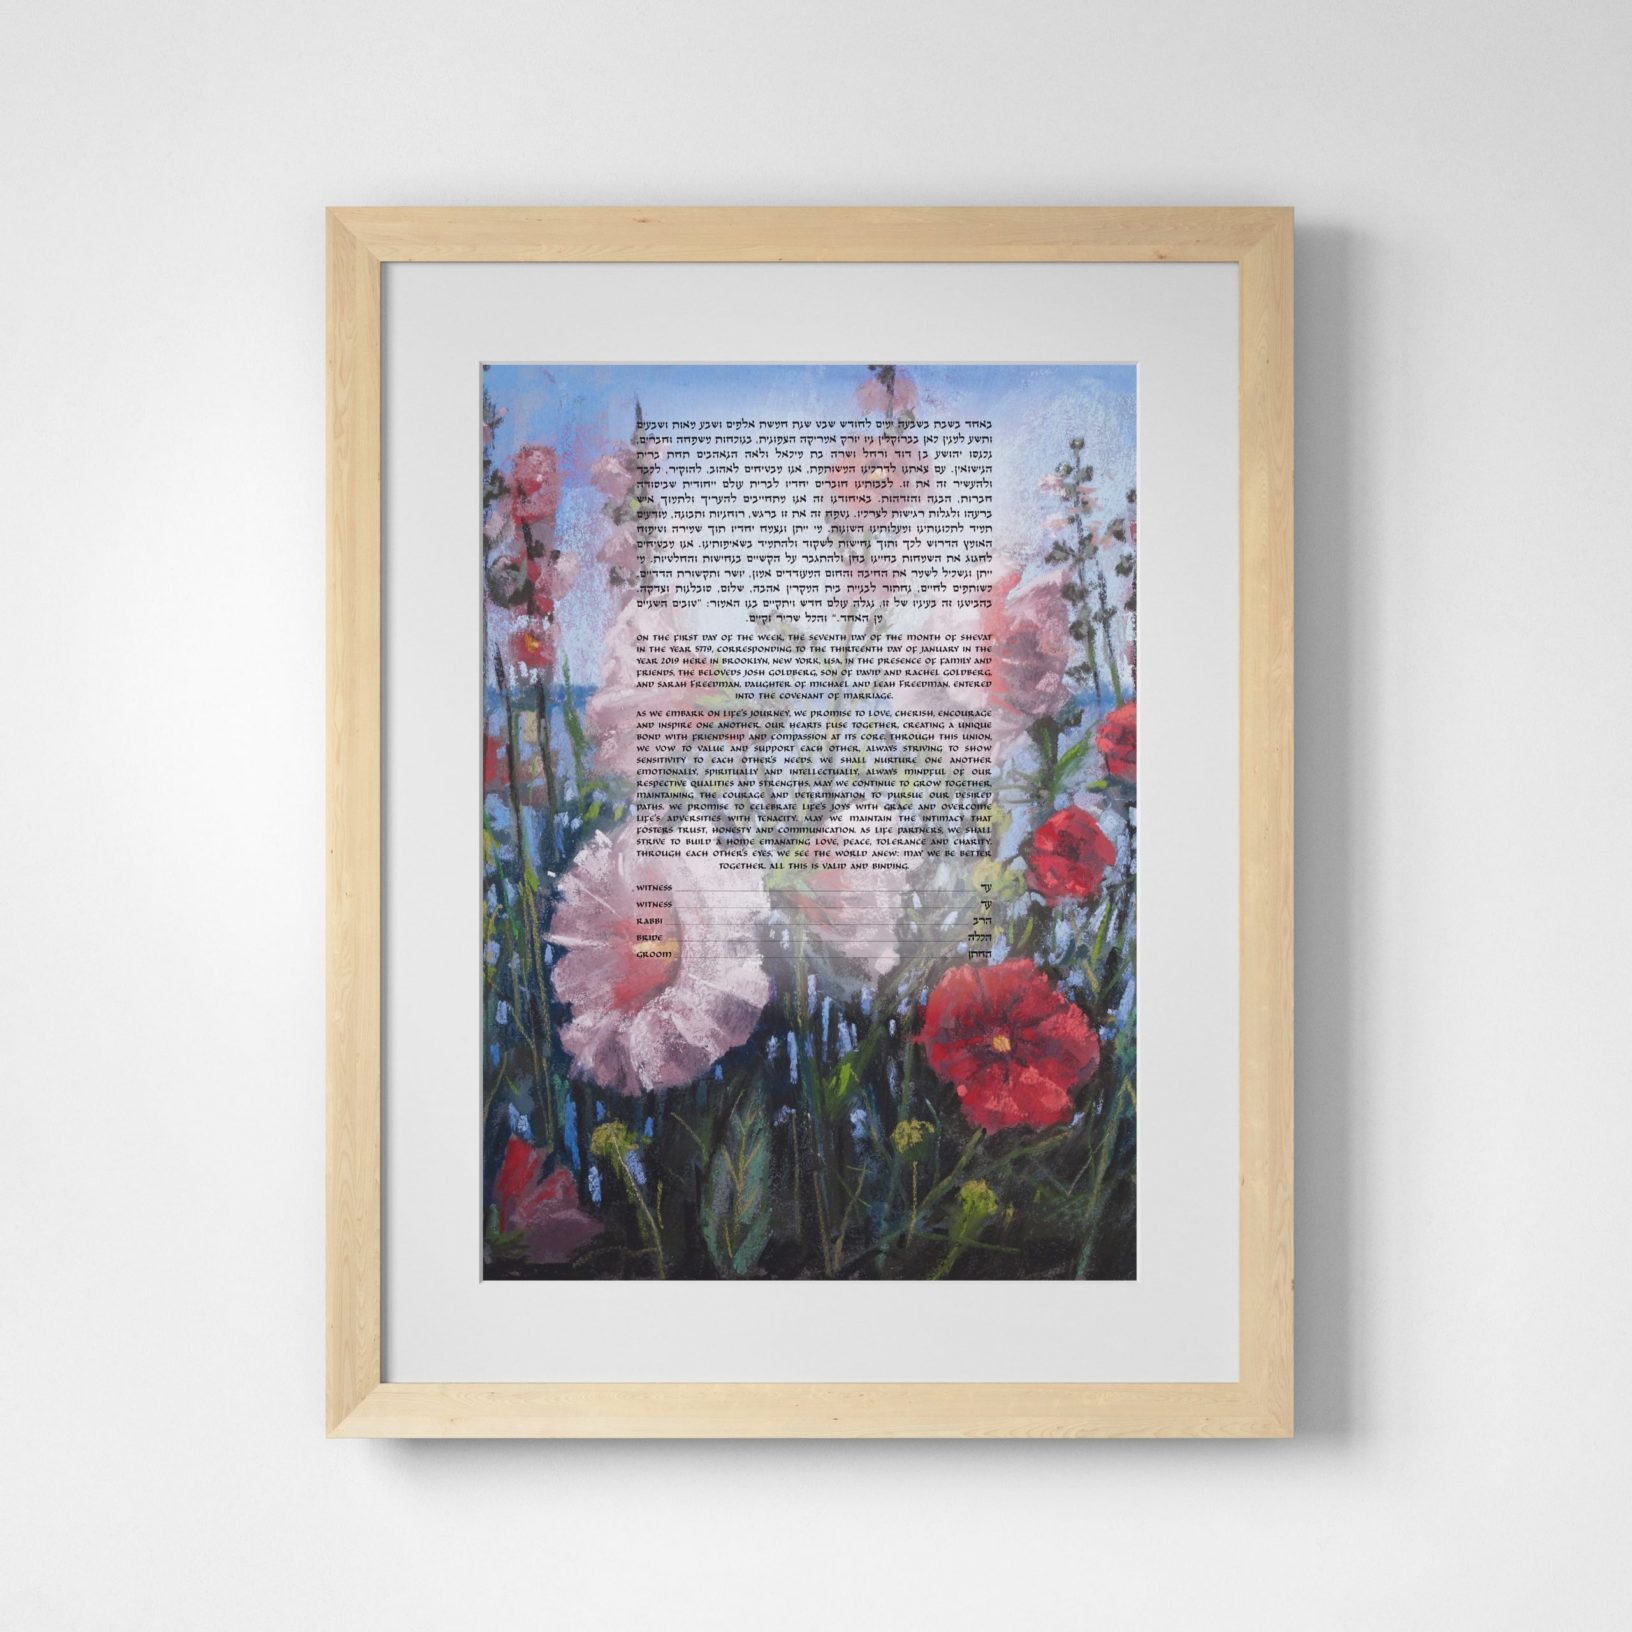 Hollyhocks By The Lake Ketubah Jewish Marriage Contracts by Susan Cone Porges